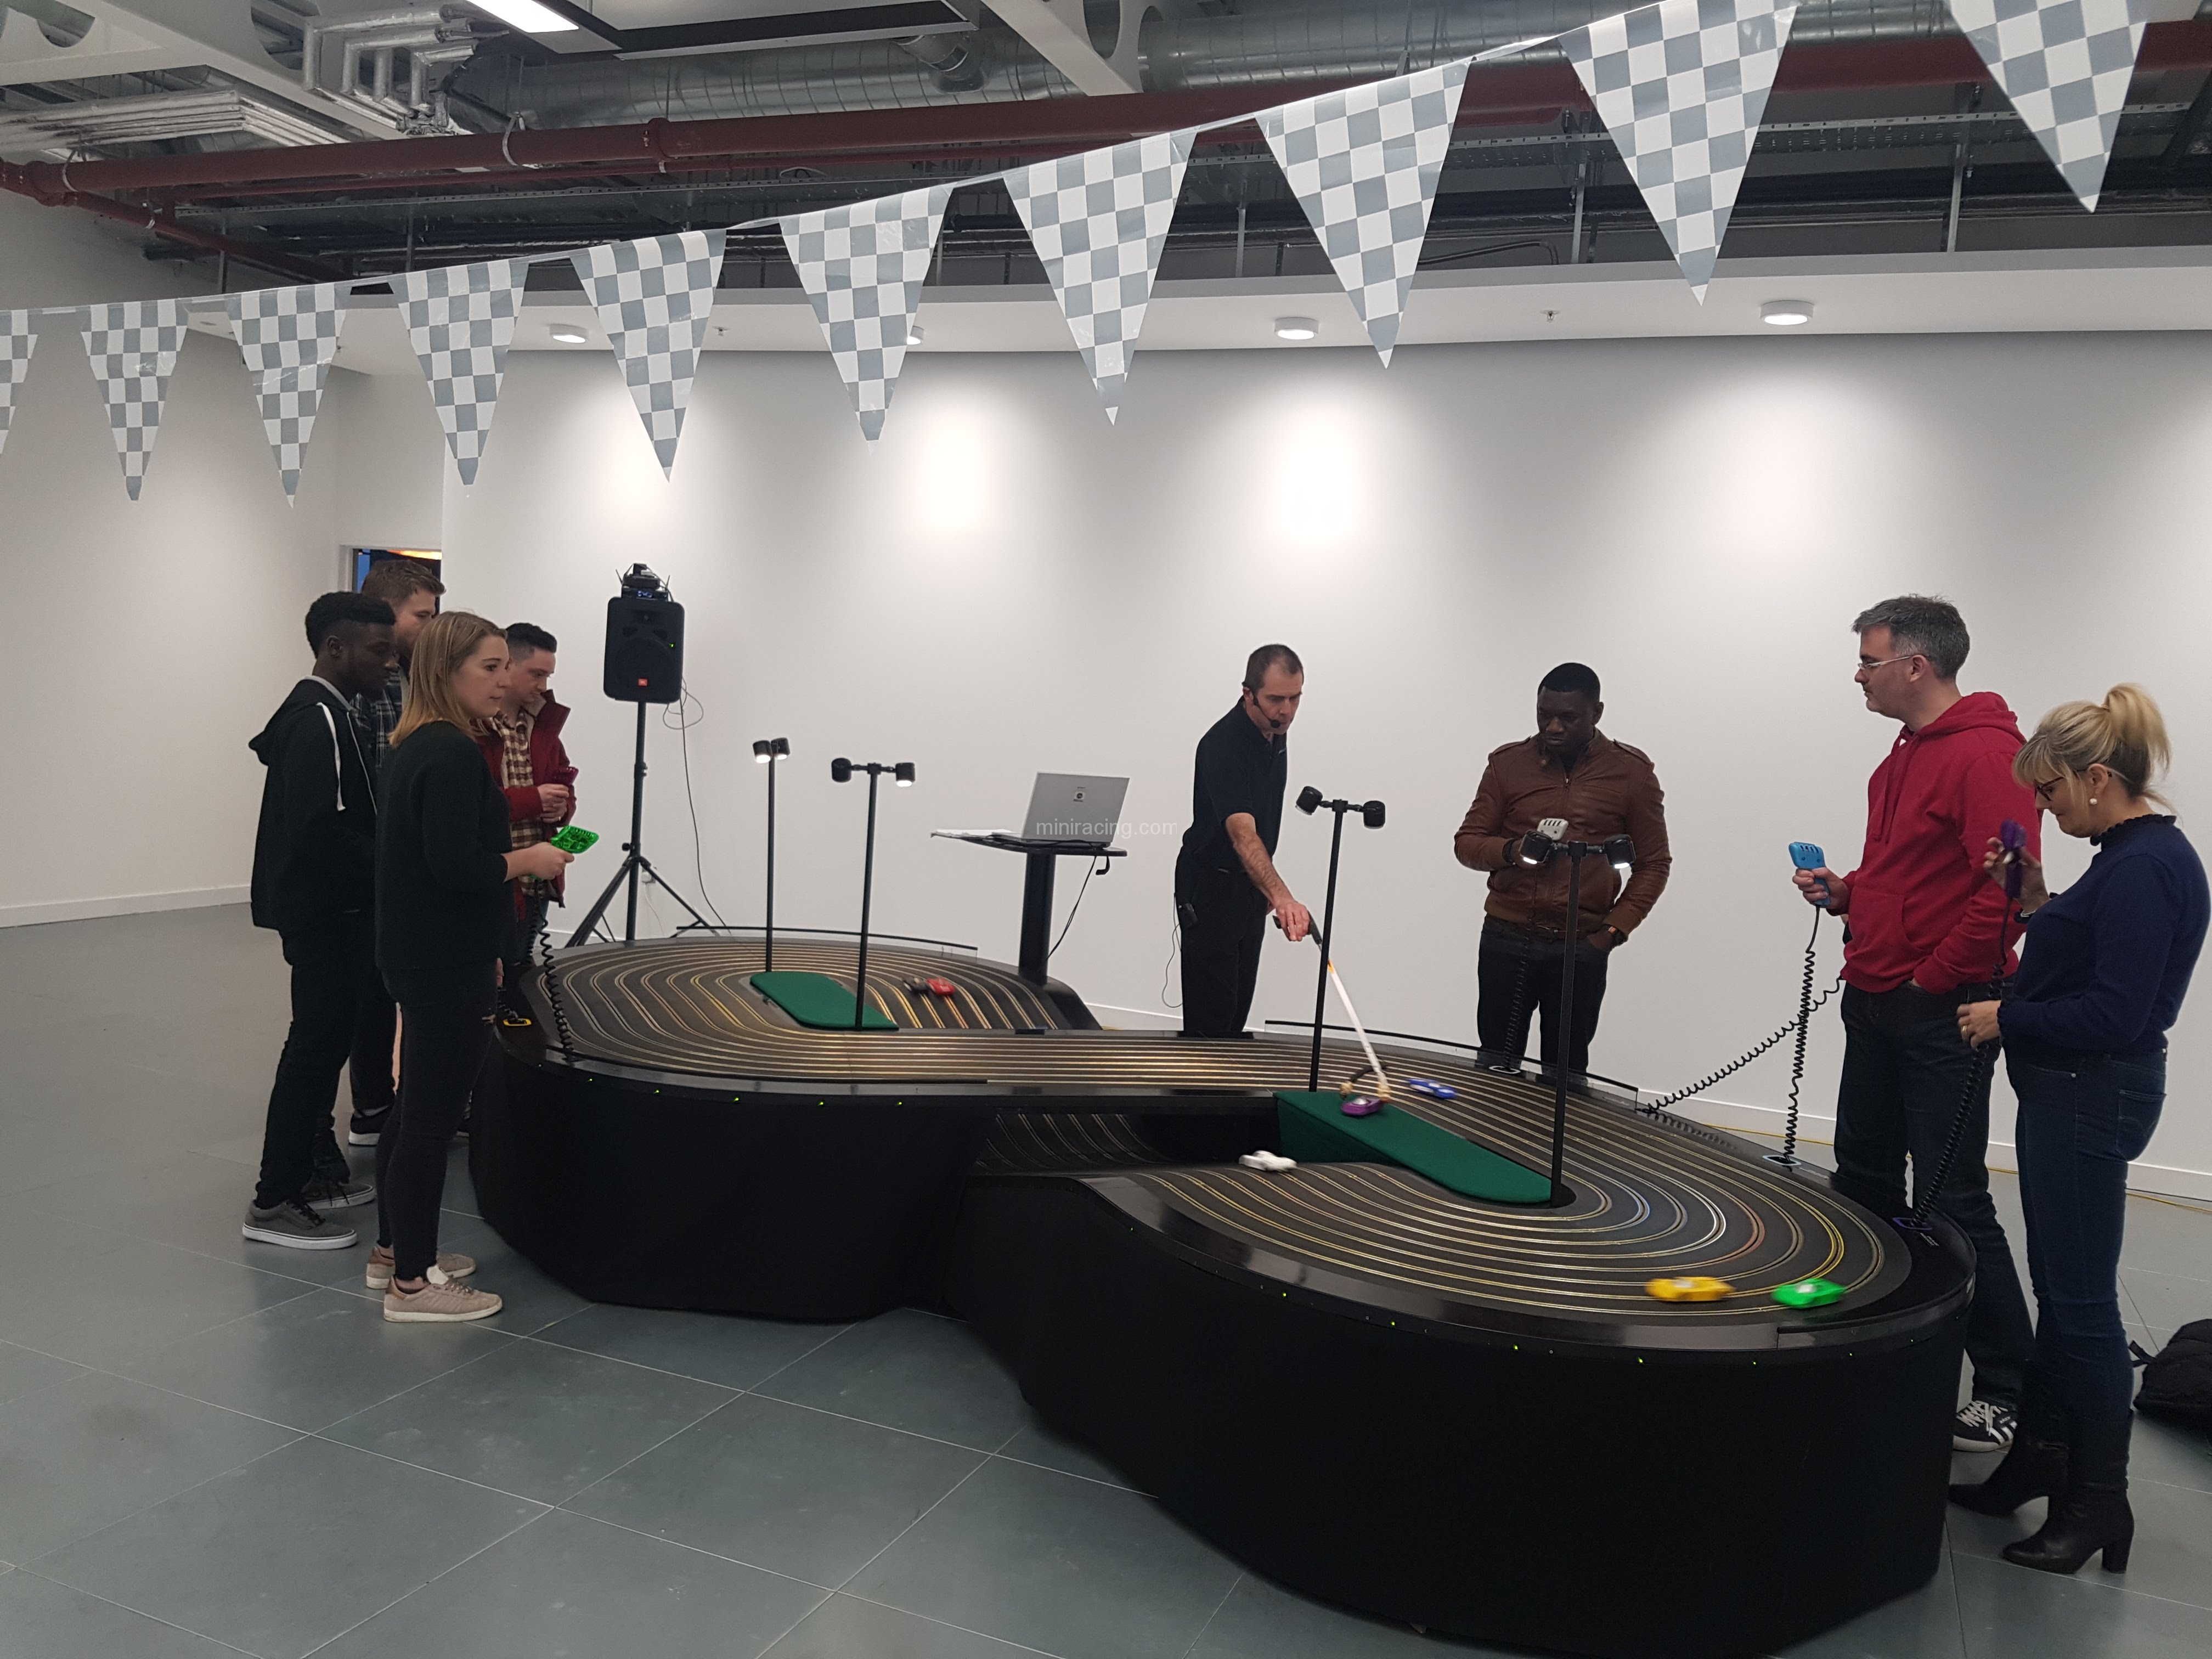 ginat-scalextric-hire-corporate-party-ideas-team-building-entertainmnet-